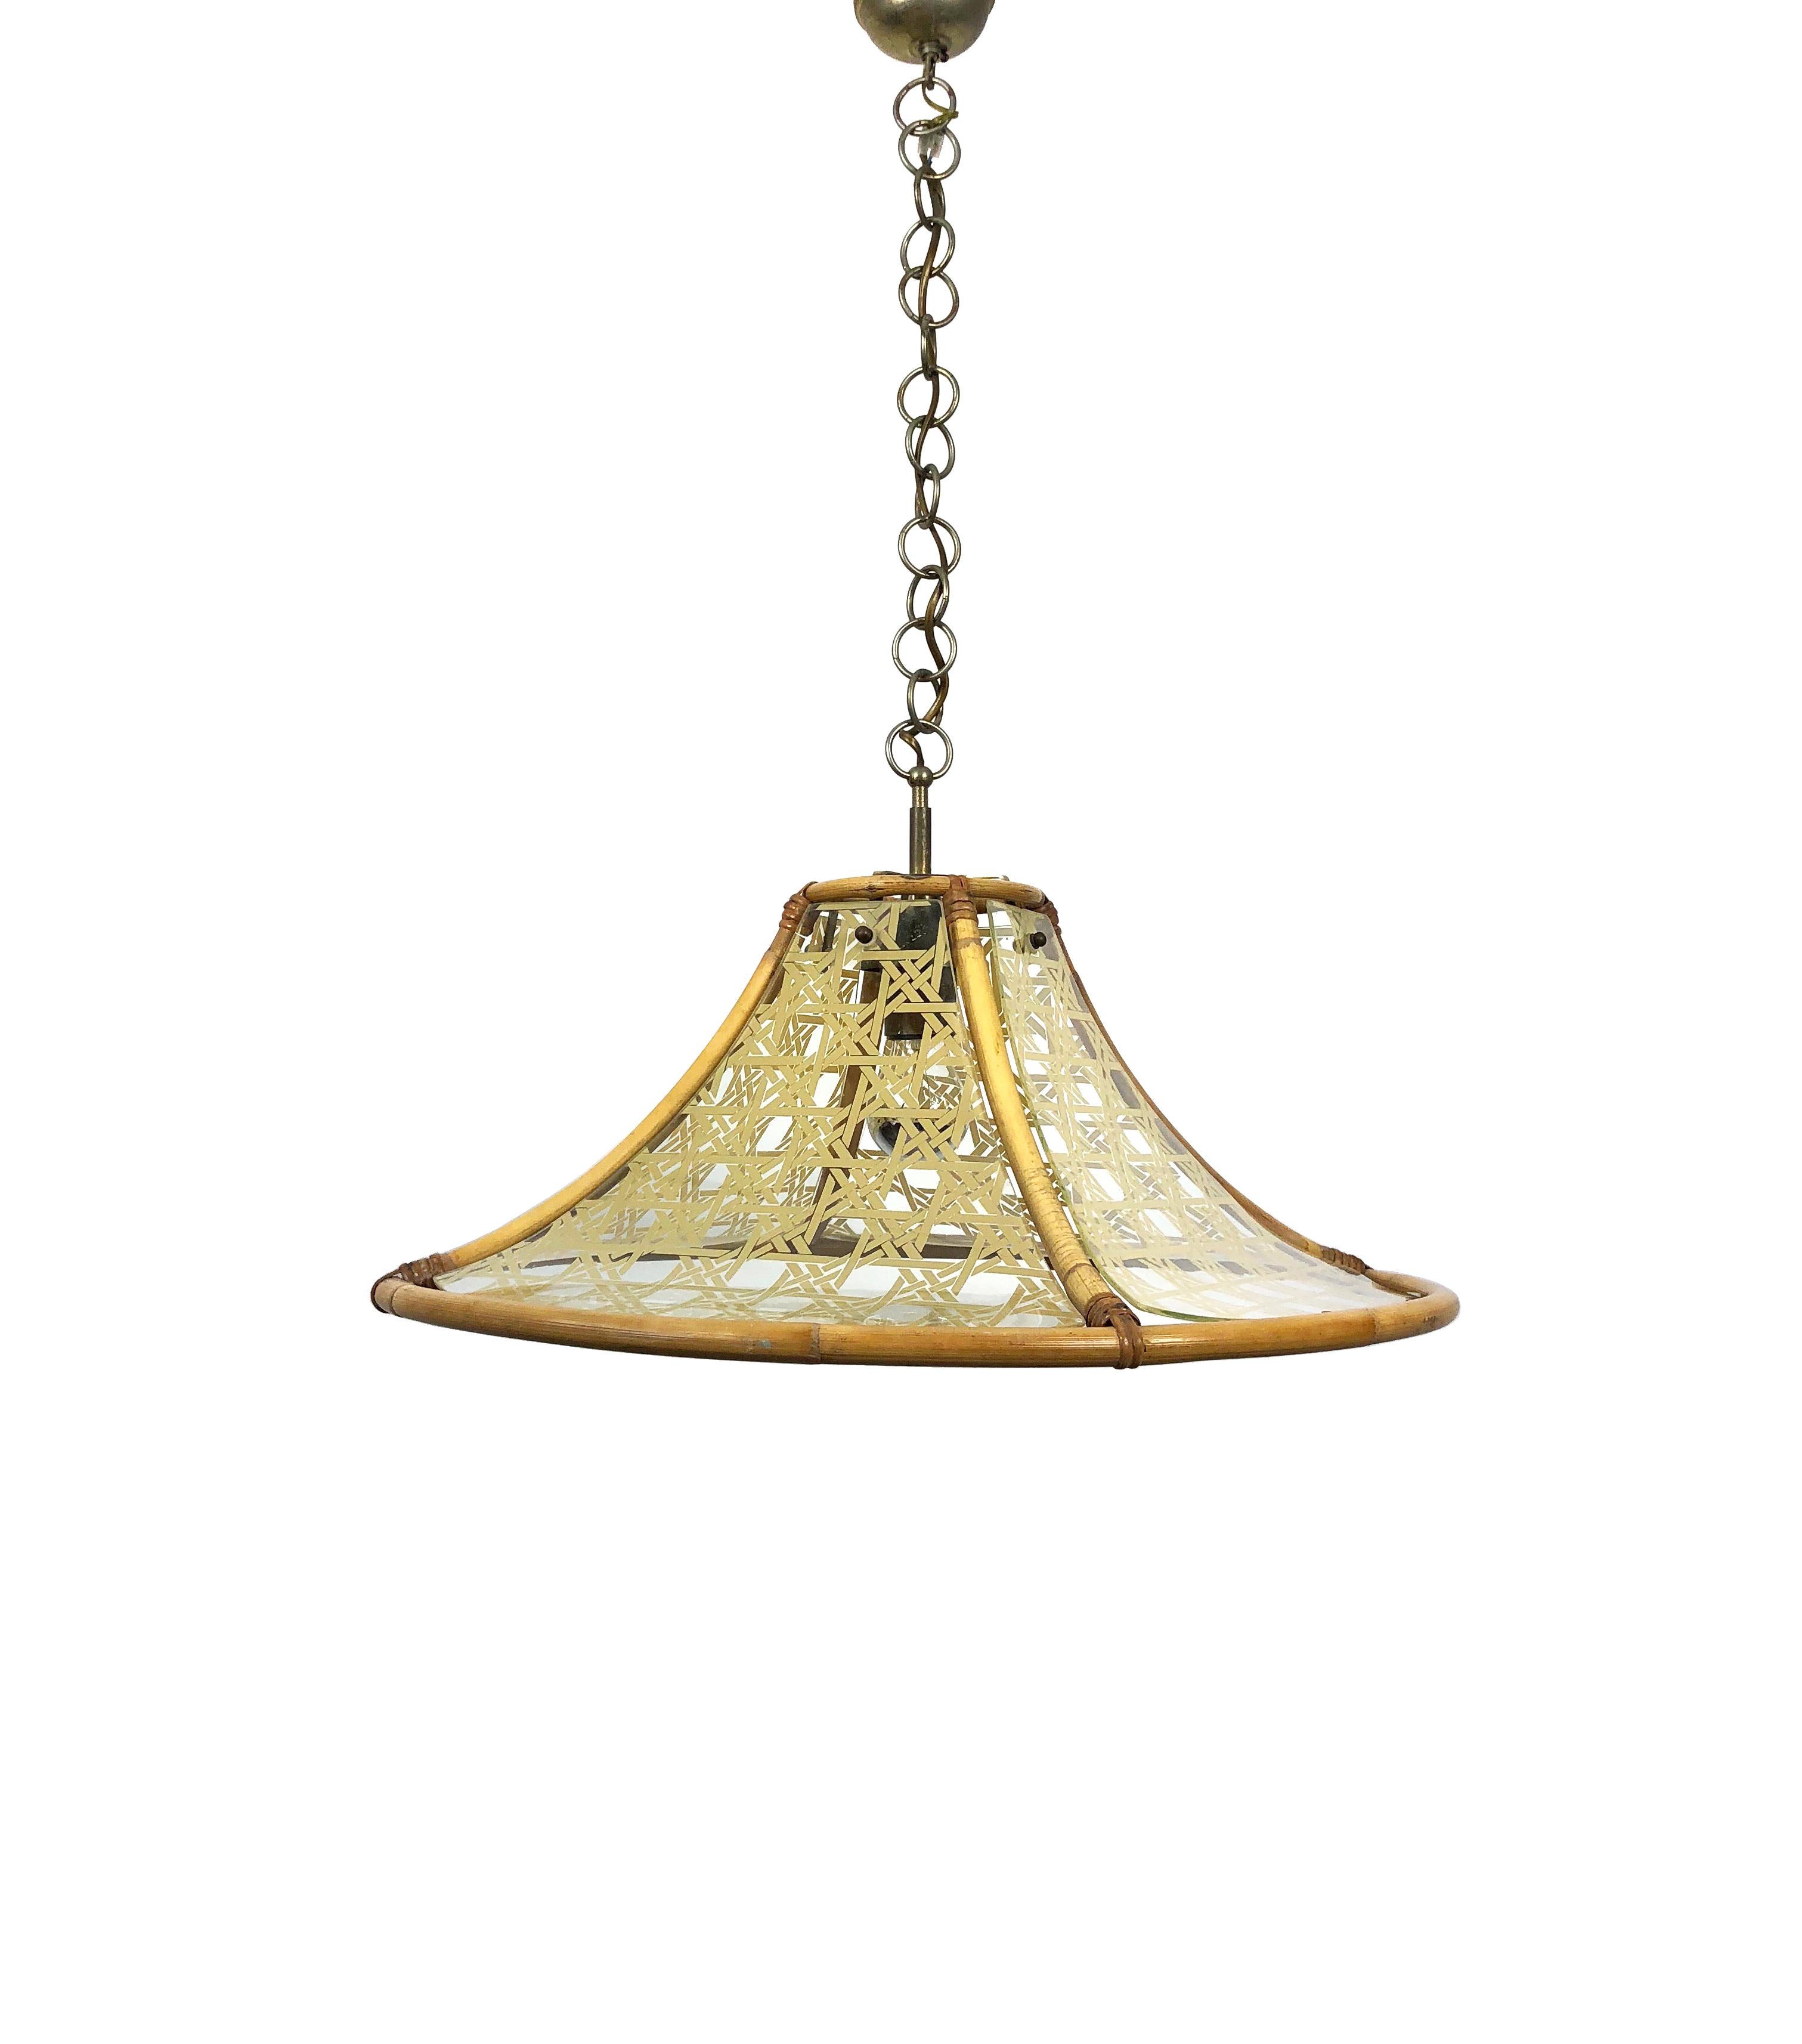 Midcentury Italian chandelier in textured glass and rattan featuring bamboo structure and metal pendant, circa 1960.